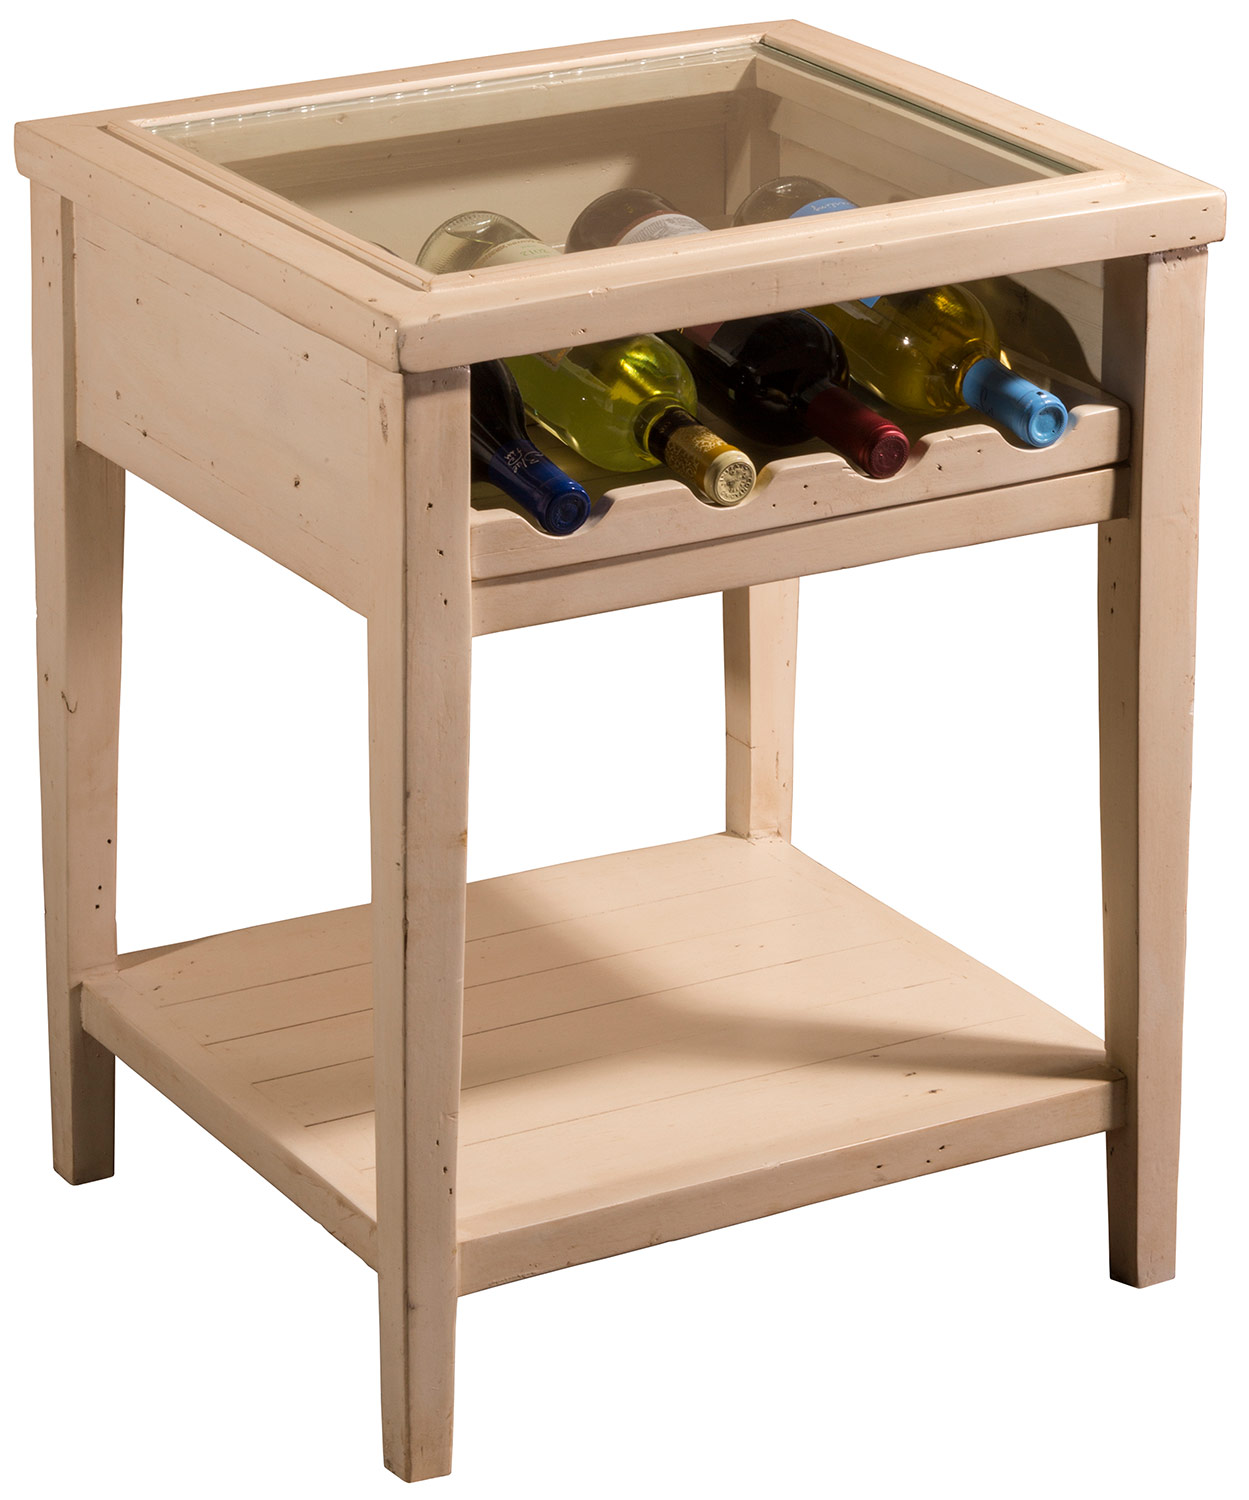 Hillsdale Tuscan Retreat Wine Display Table - Country White